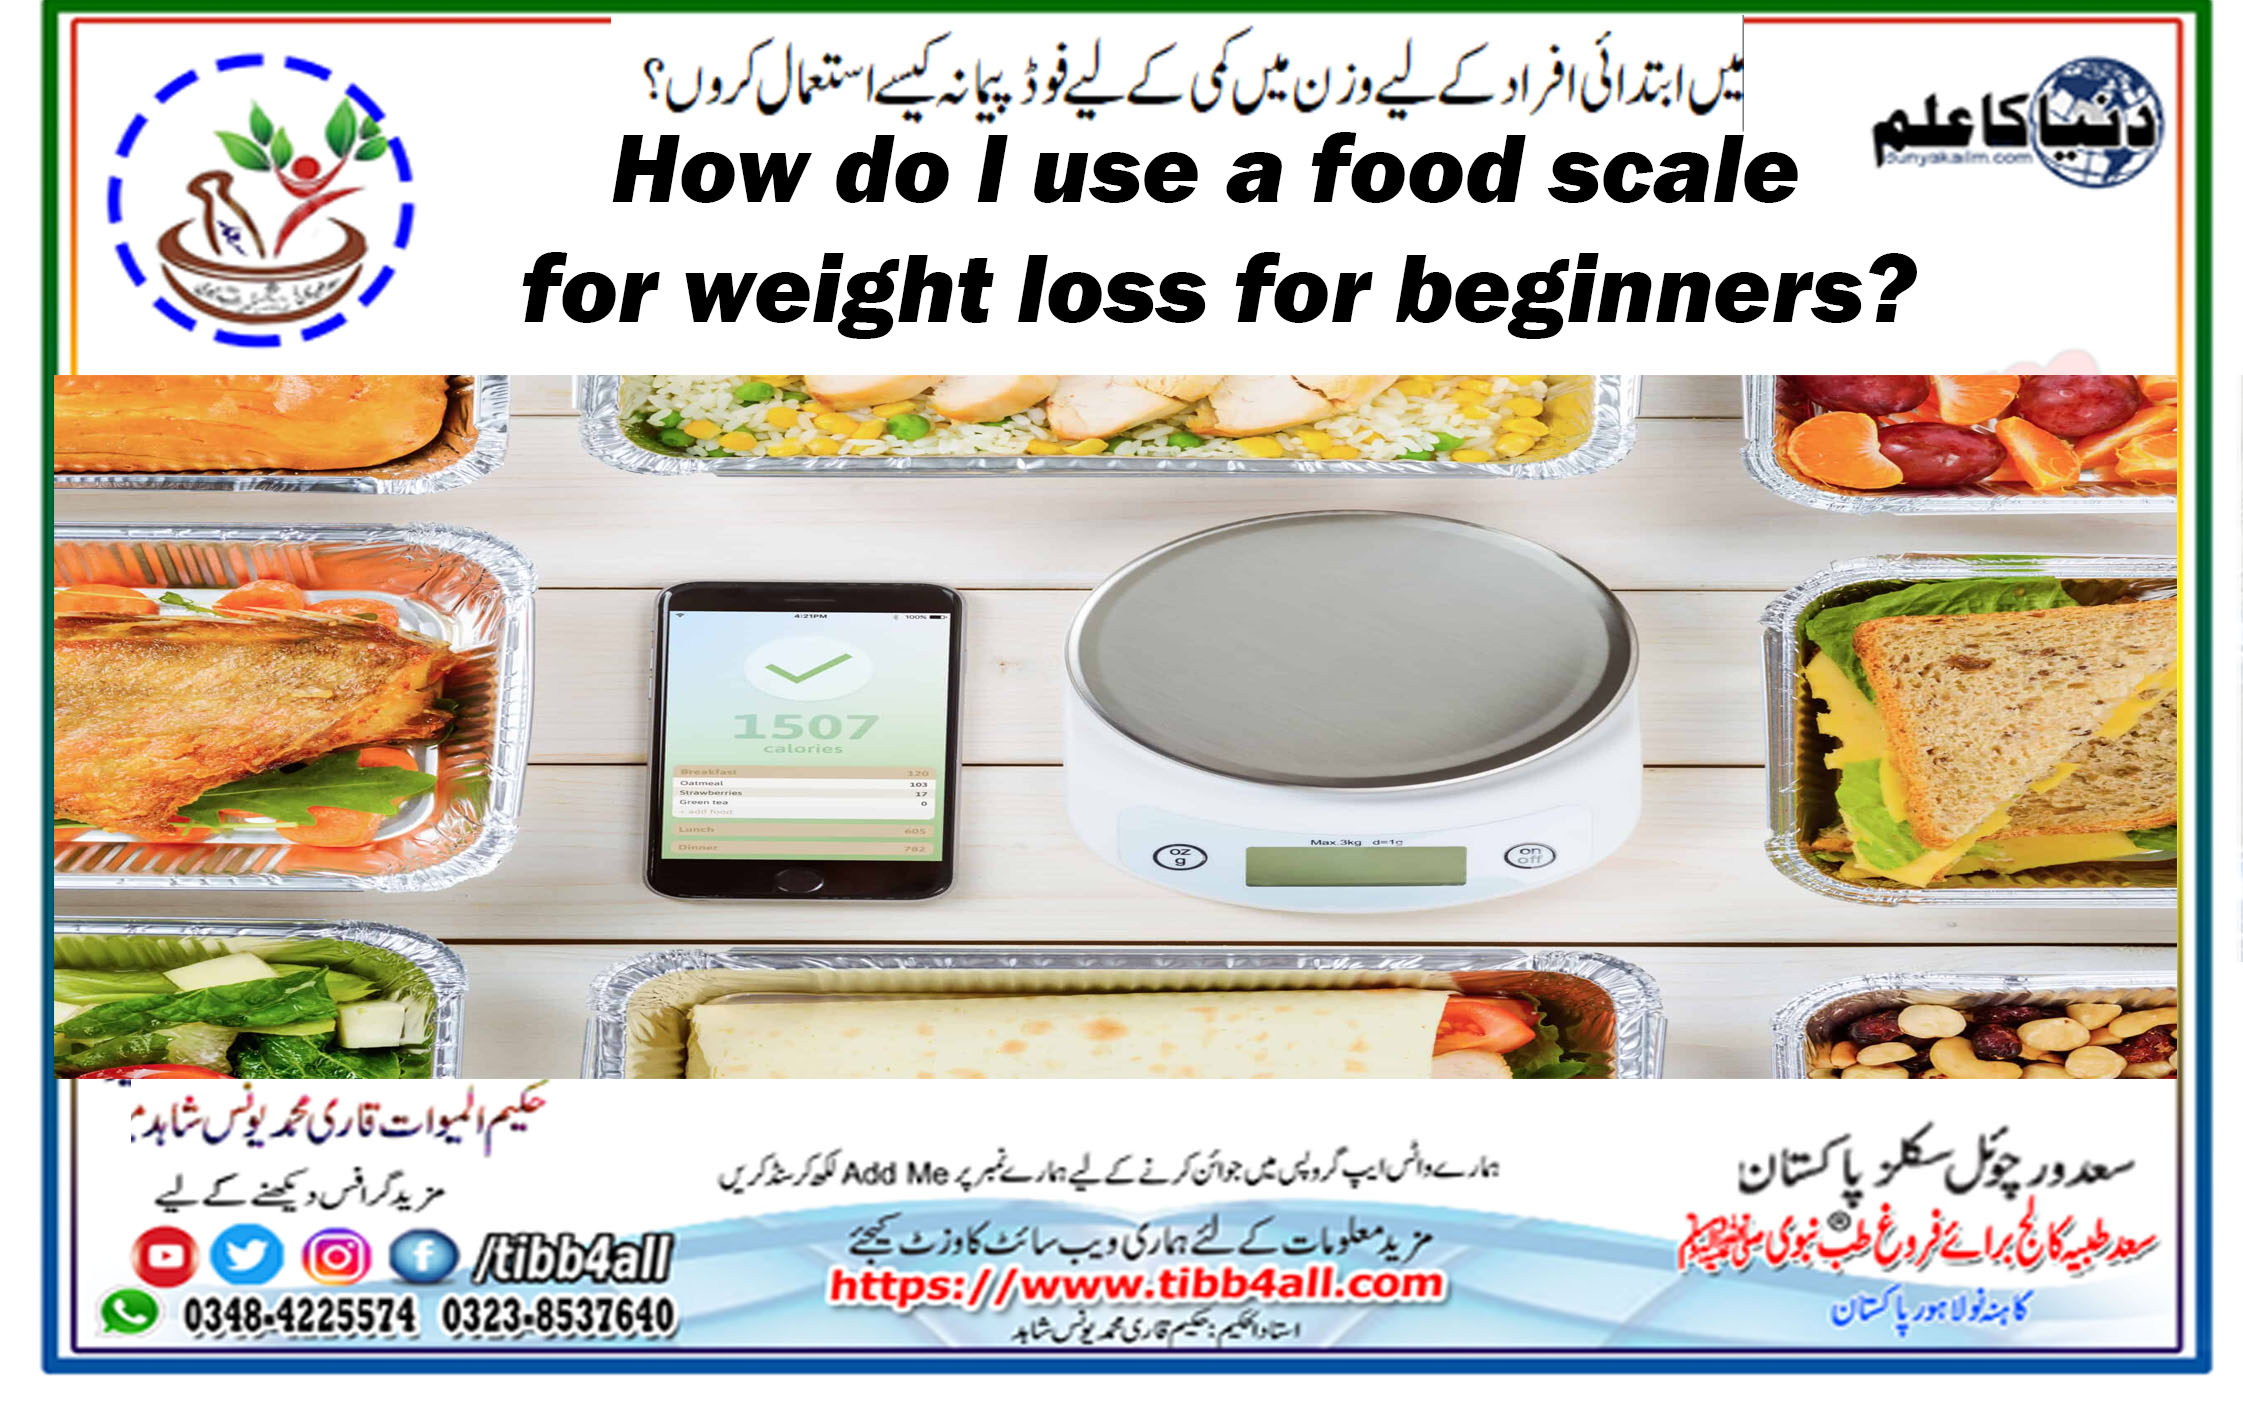 How do I use a food scale for weight loss for beginners?